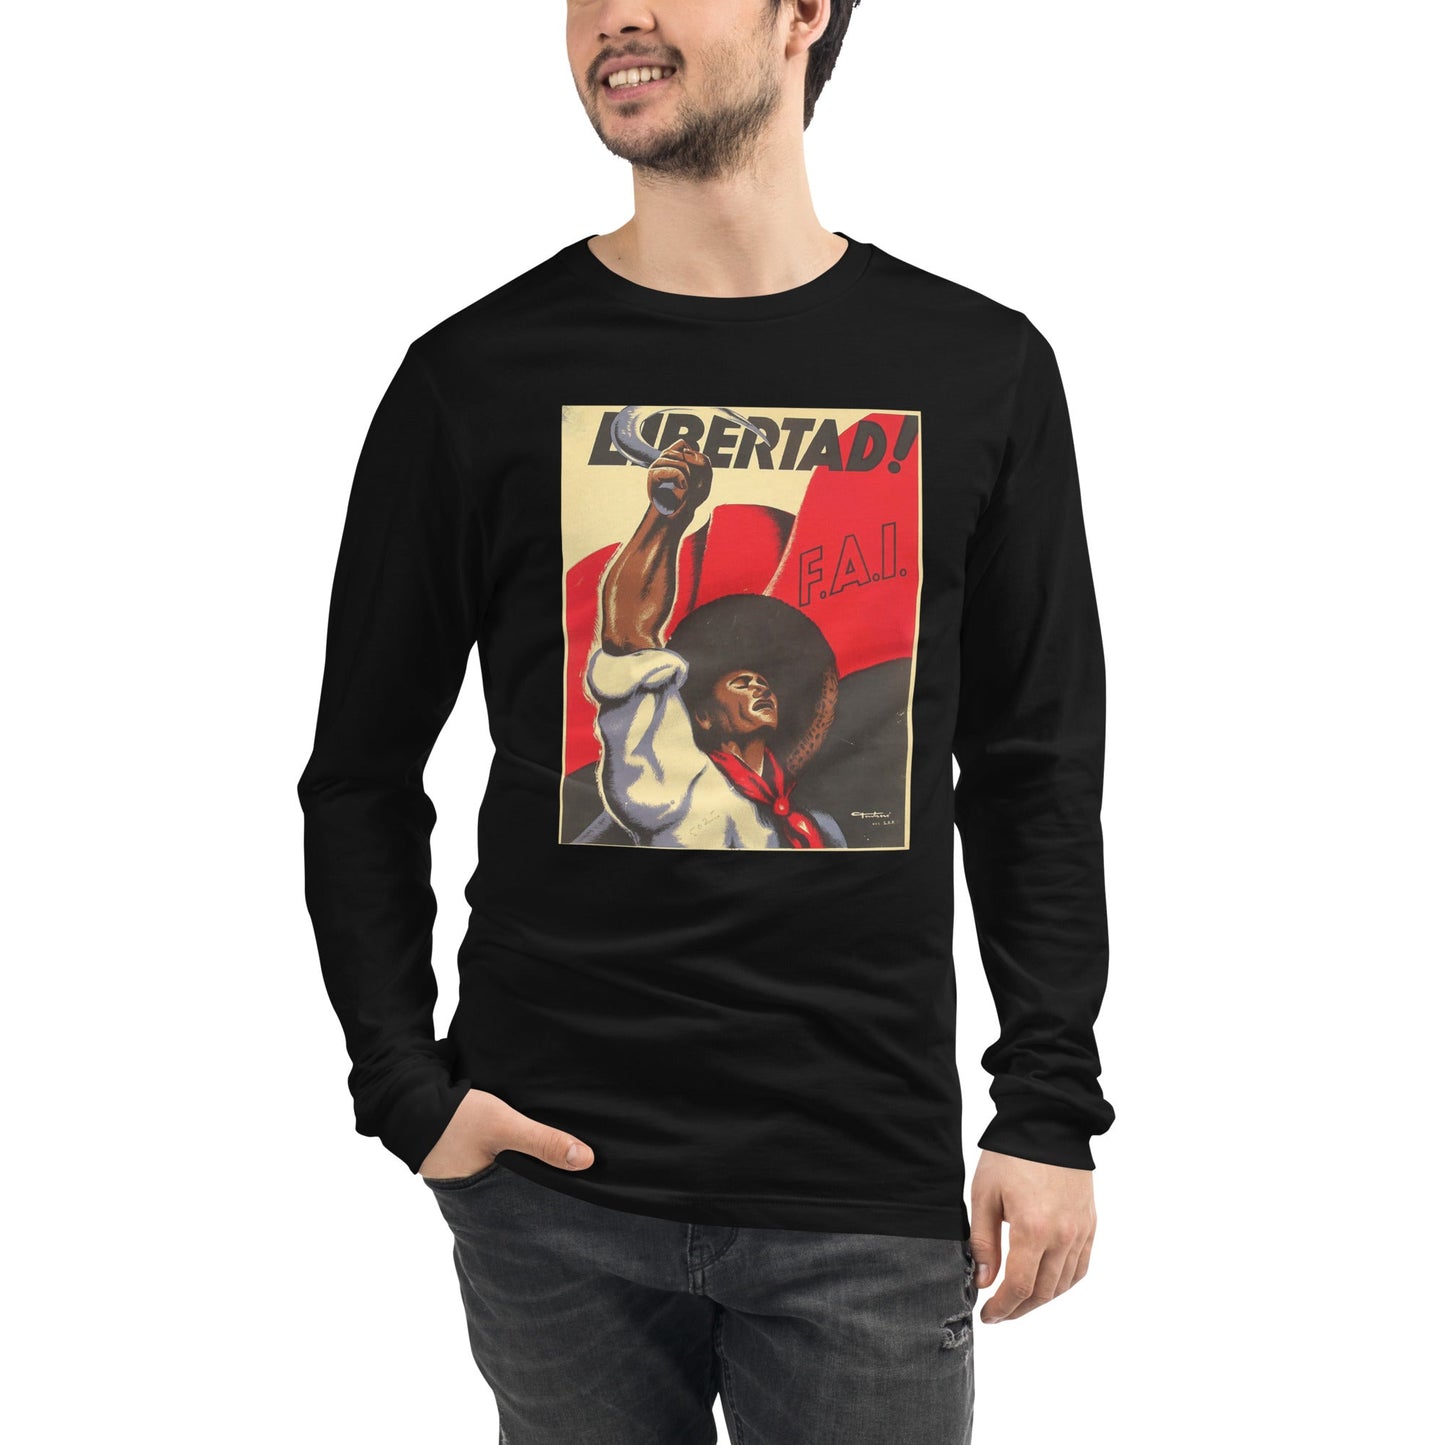 Libertad - Unisex Long Sleeve Tee - Souled Out World